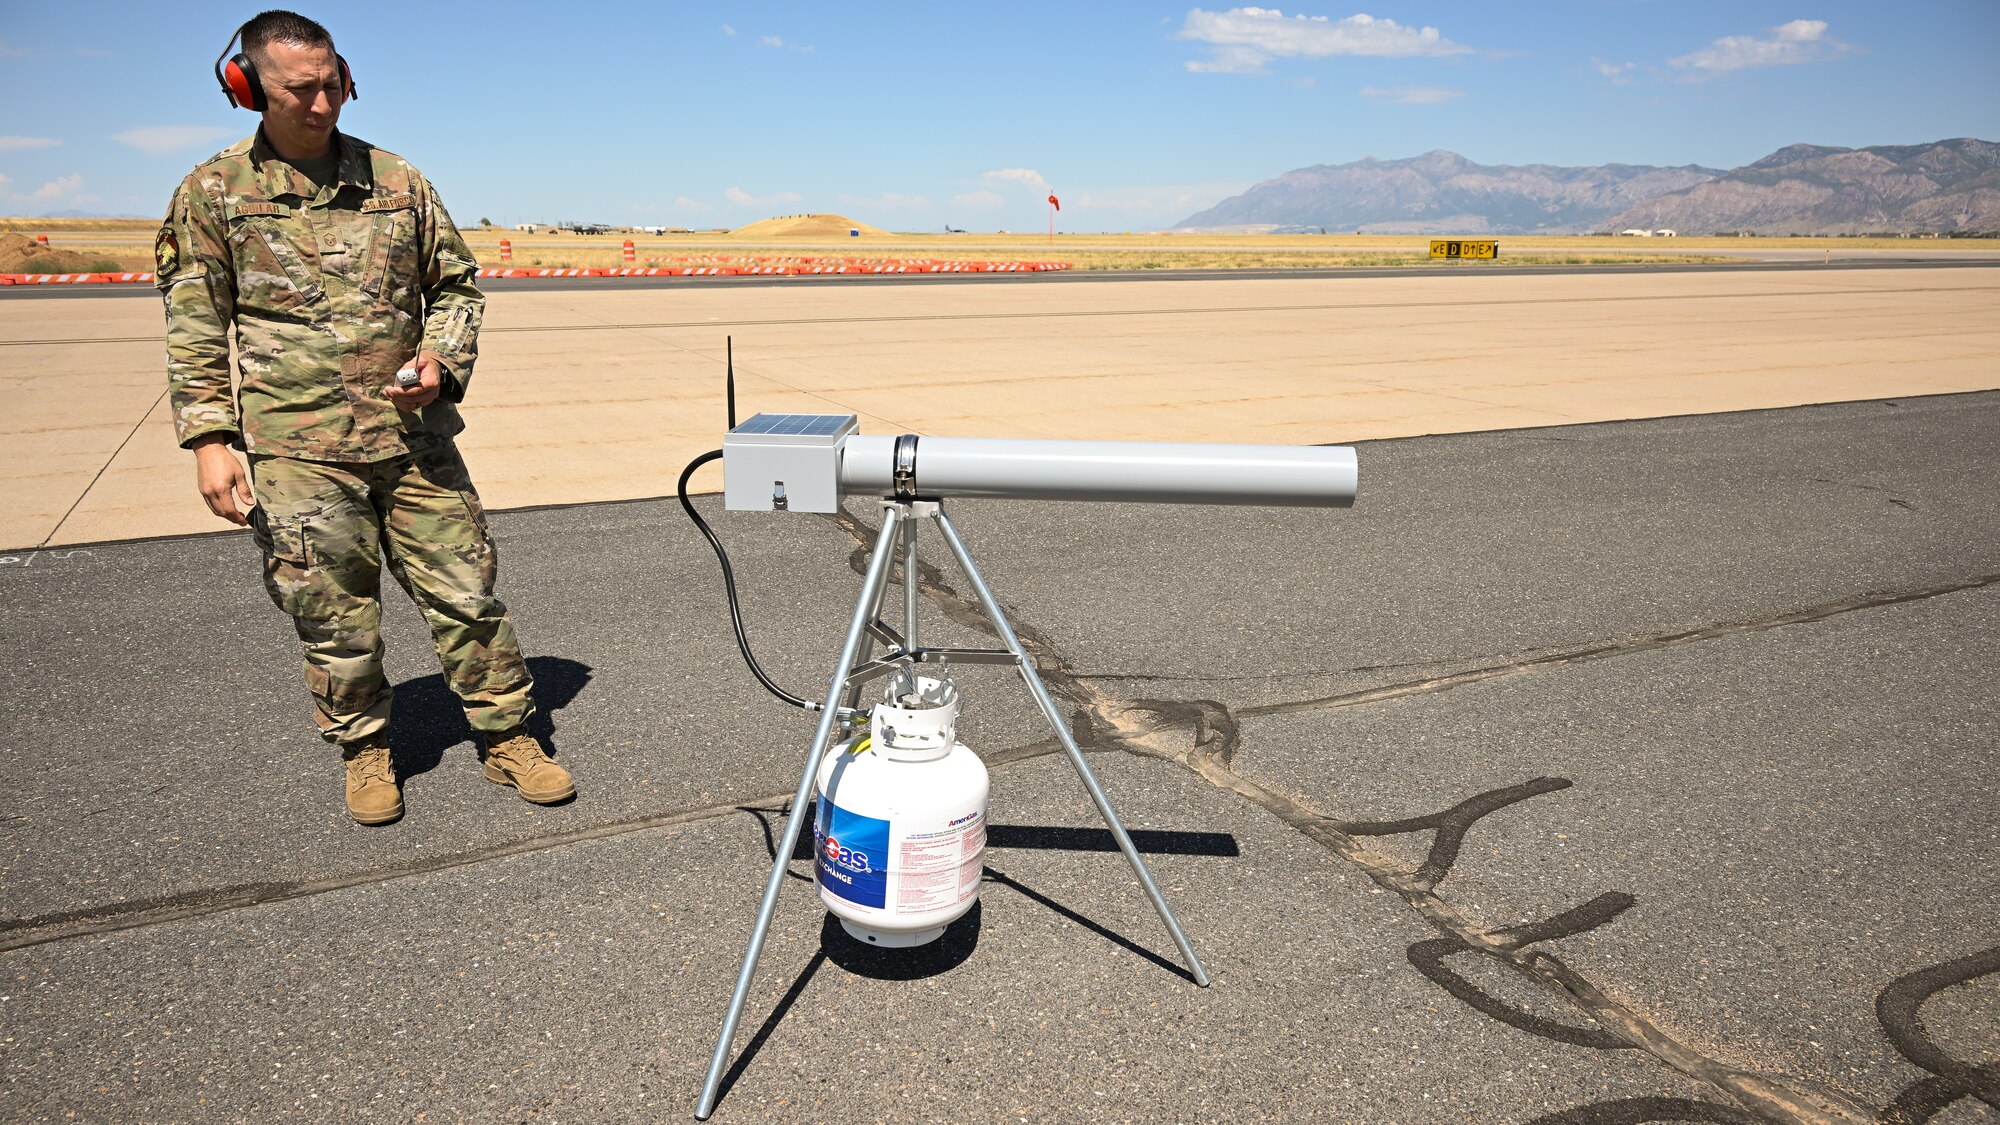 Master Sgt. Chris Aguilar, 75th Air Base Wing Safety Office superintendent, fires a propane cannon.